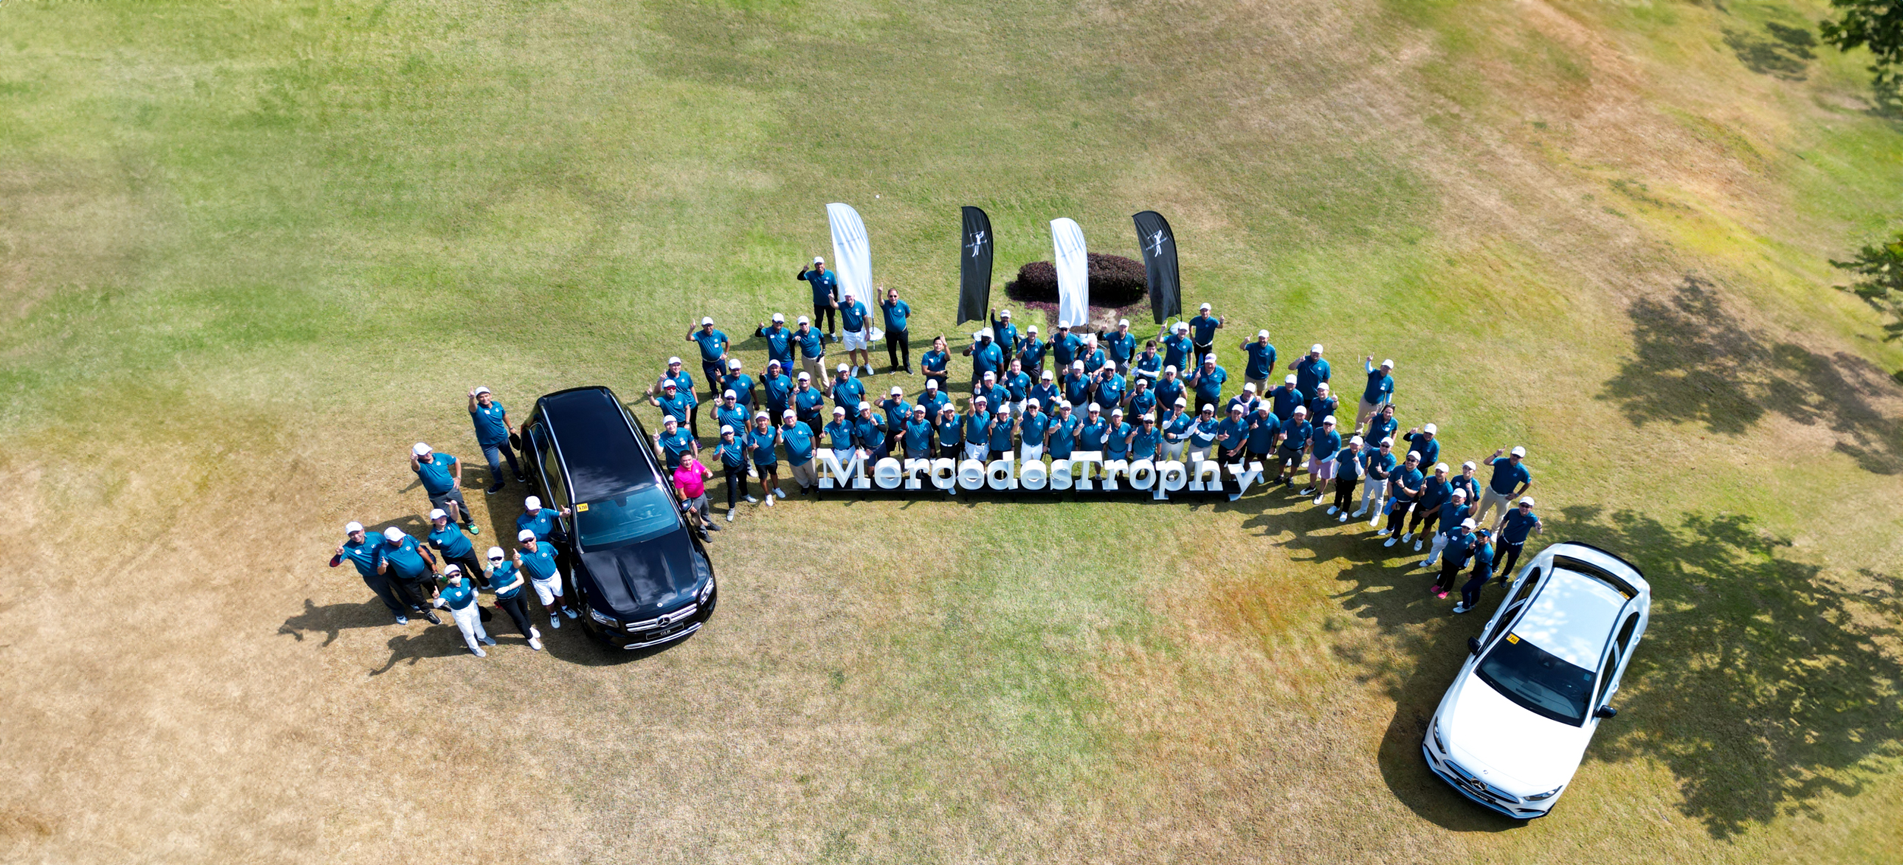 15th MercedesTrophy Philippines Group Photo